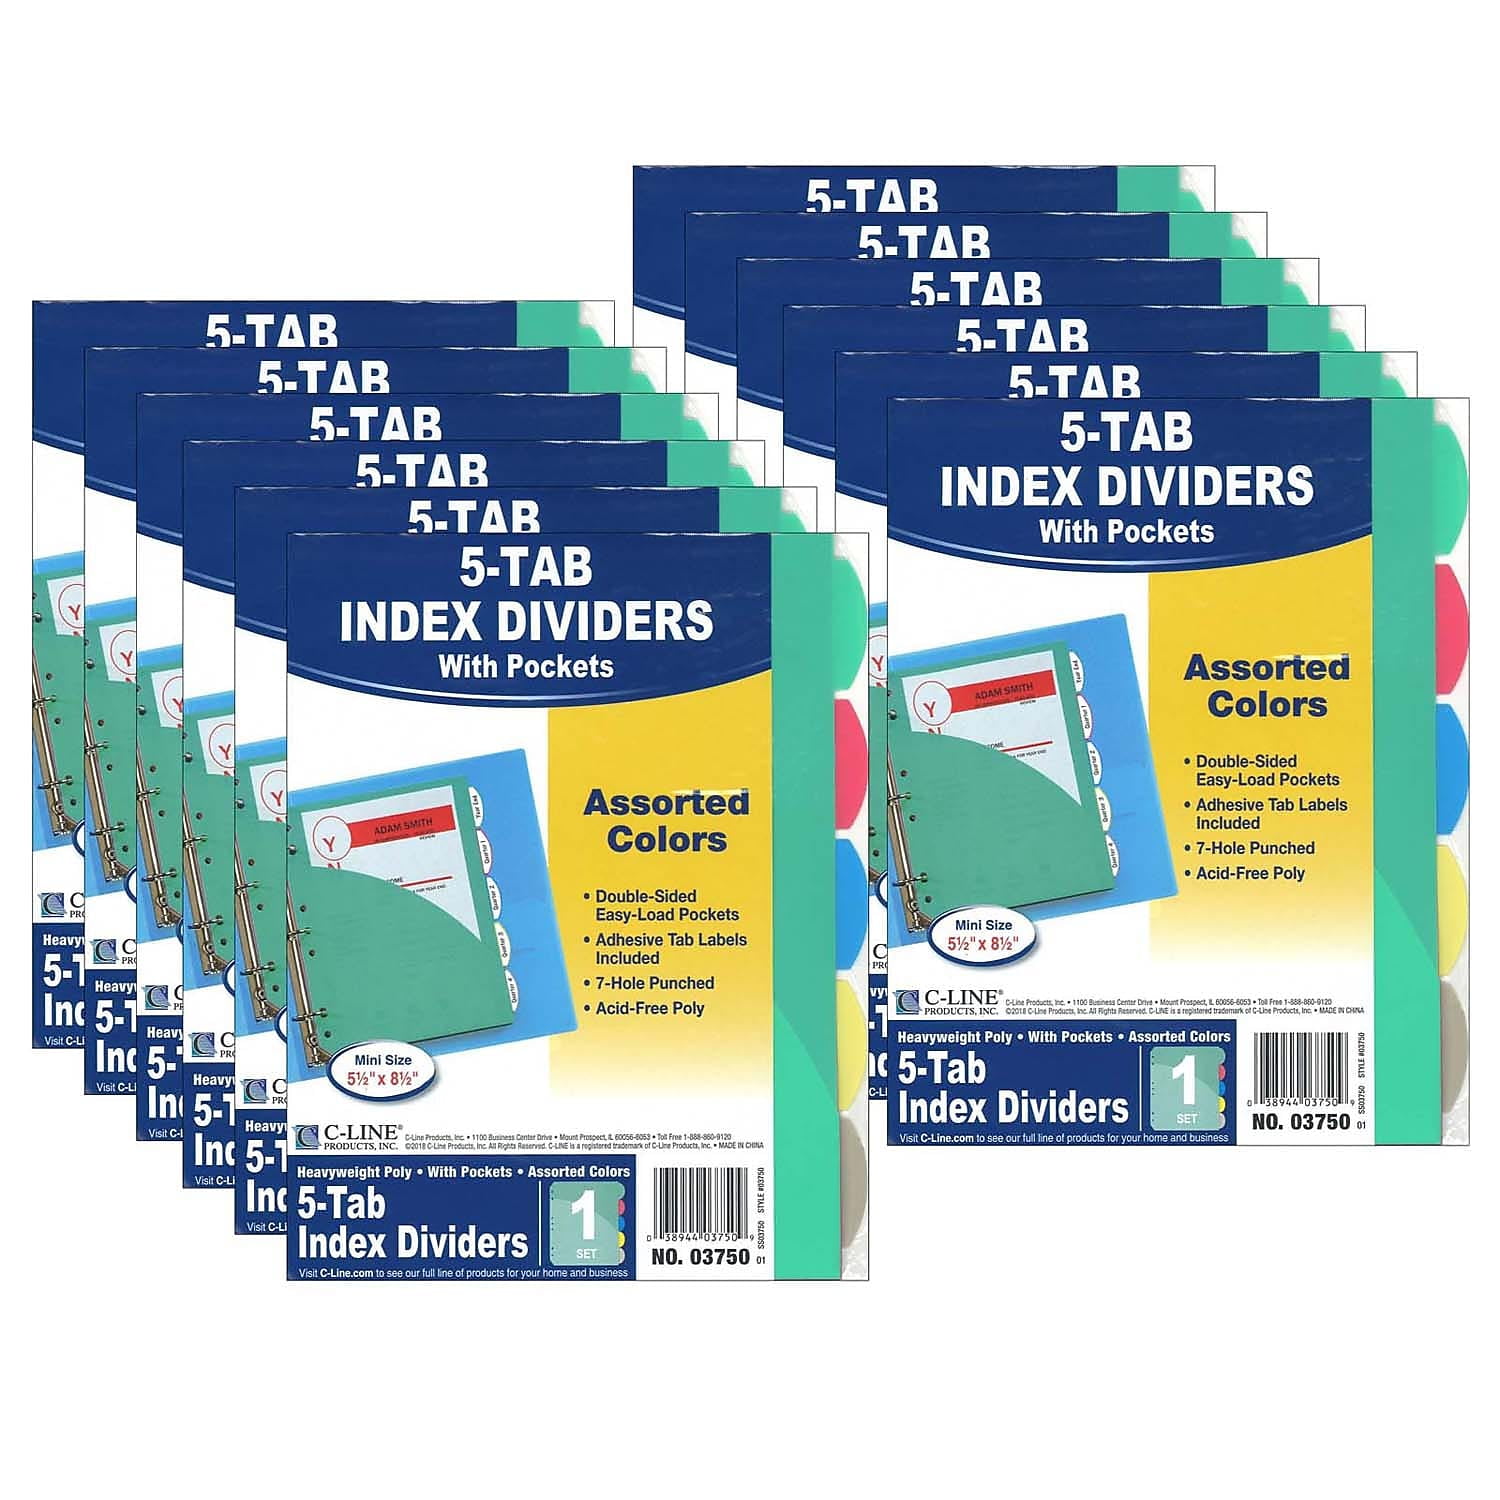 Mini Size 5-Tab Poly Index Dividers with Pockets 3 Packs 15 total sets 